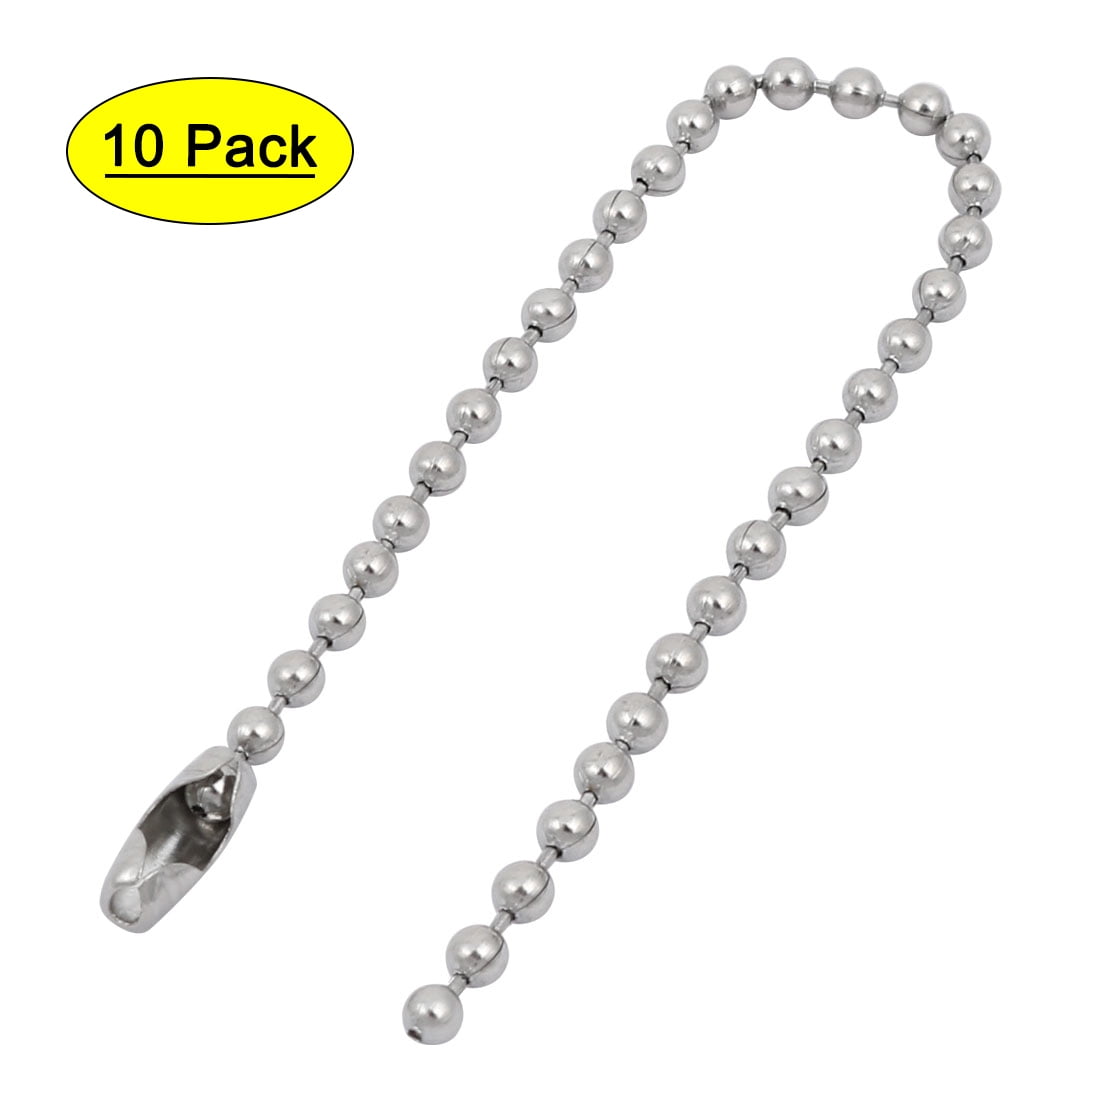 Lot of 20 Ballchain Necklaces Metal Ball Chain and Connectors 4" 2.4mm Beads 